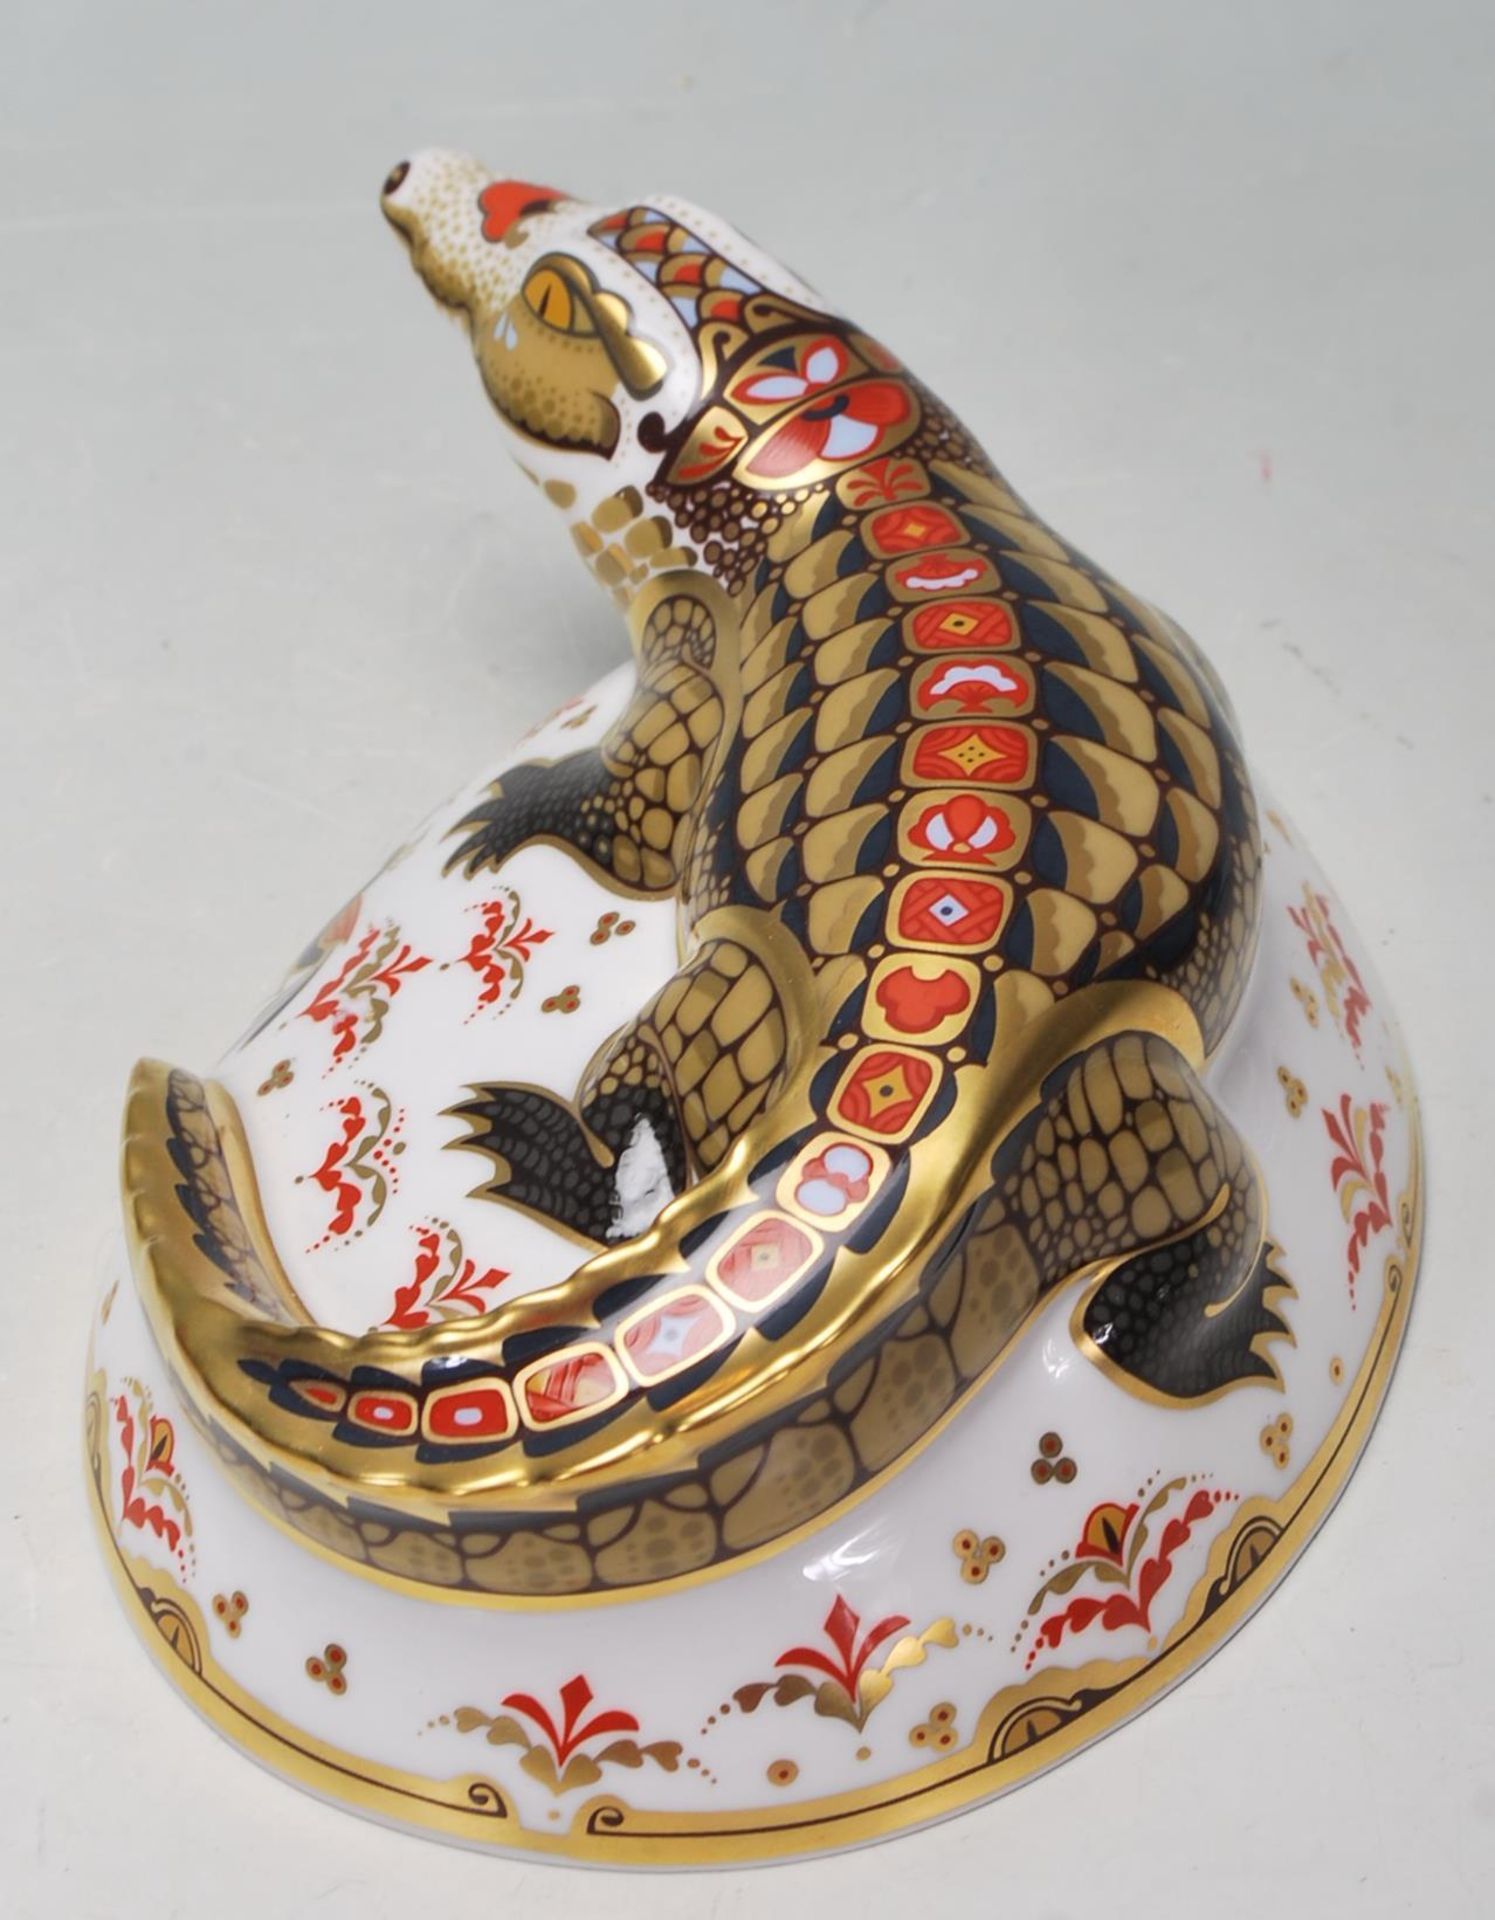 ROYAL CROWN DERBY PAPERWEIGHT IN A FORM OF CROCODILE WITH GOLD STOPPER - Image 4 of 7